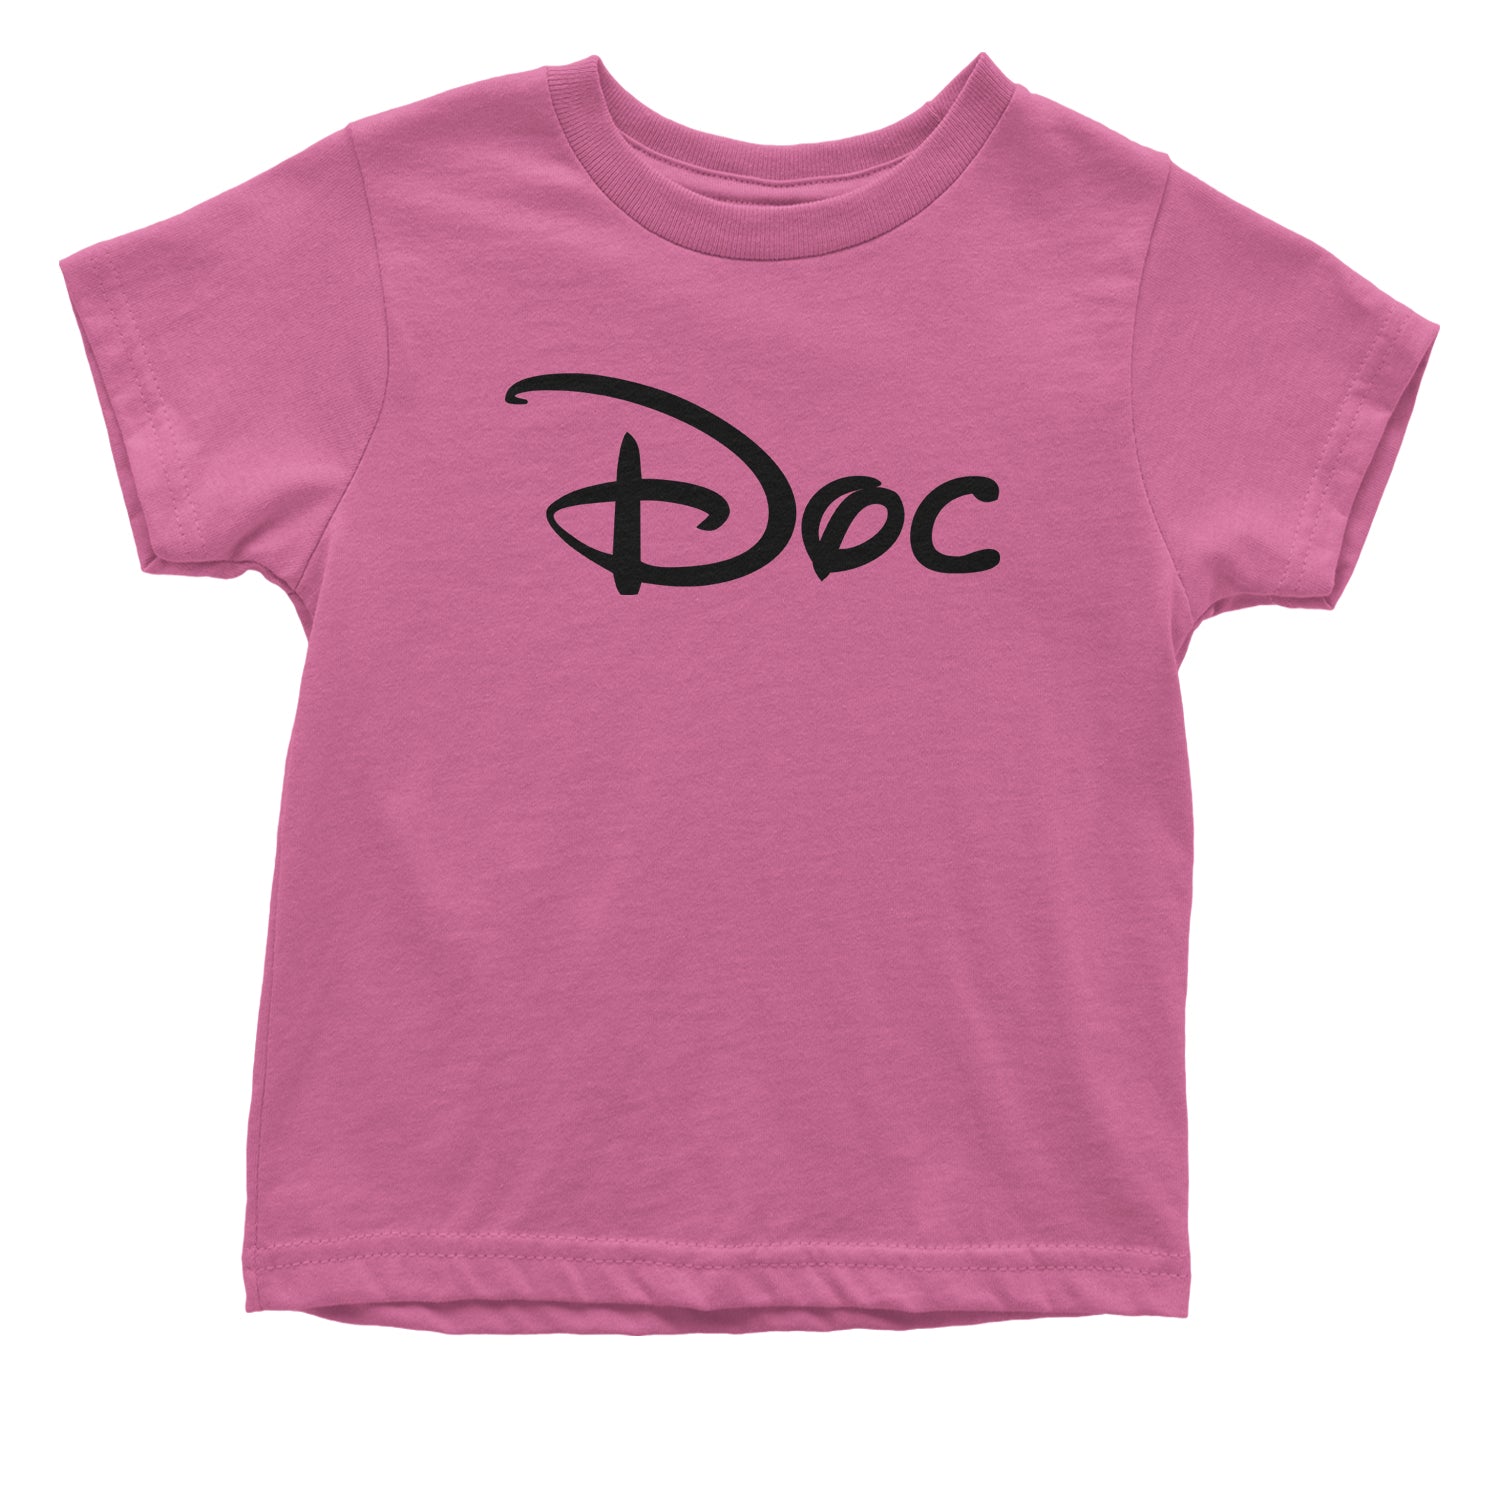 Doc - 7 Dwarfs Costume Toddler T-Shirt and, costume, dwarfs, group, halloween, matching, seven, snow, the, white by Expression Tees